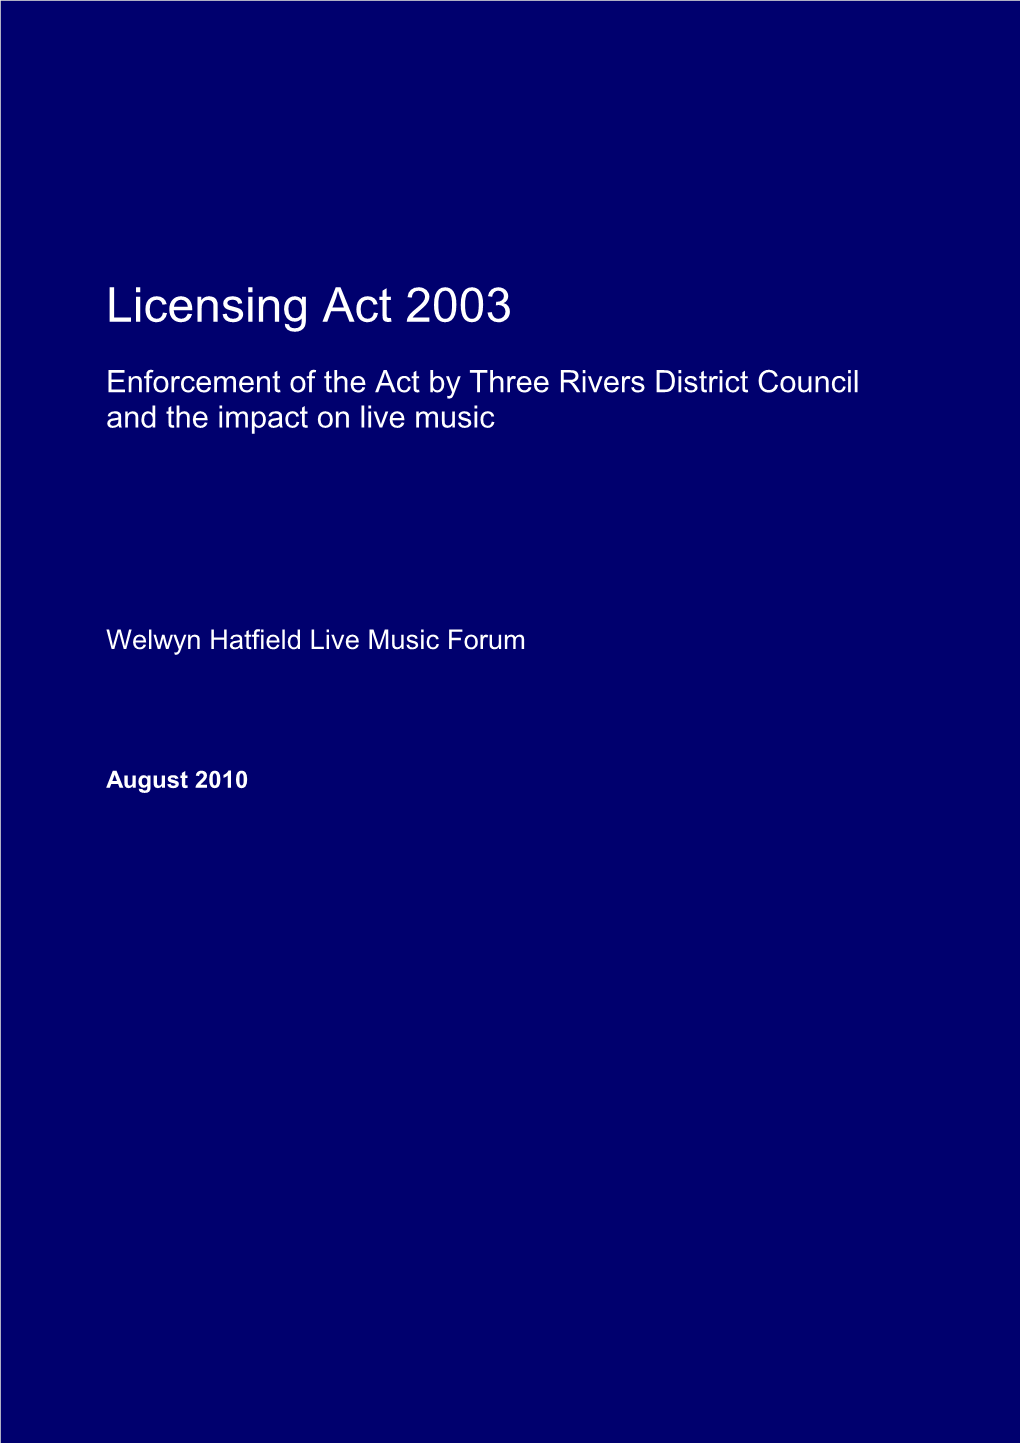 Licensing Act 2003: Live Music in Three Rivers